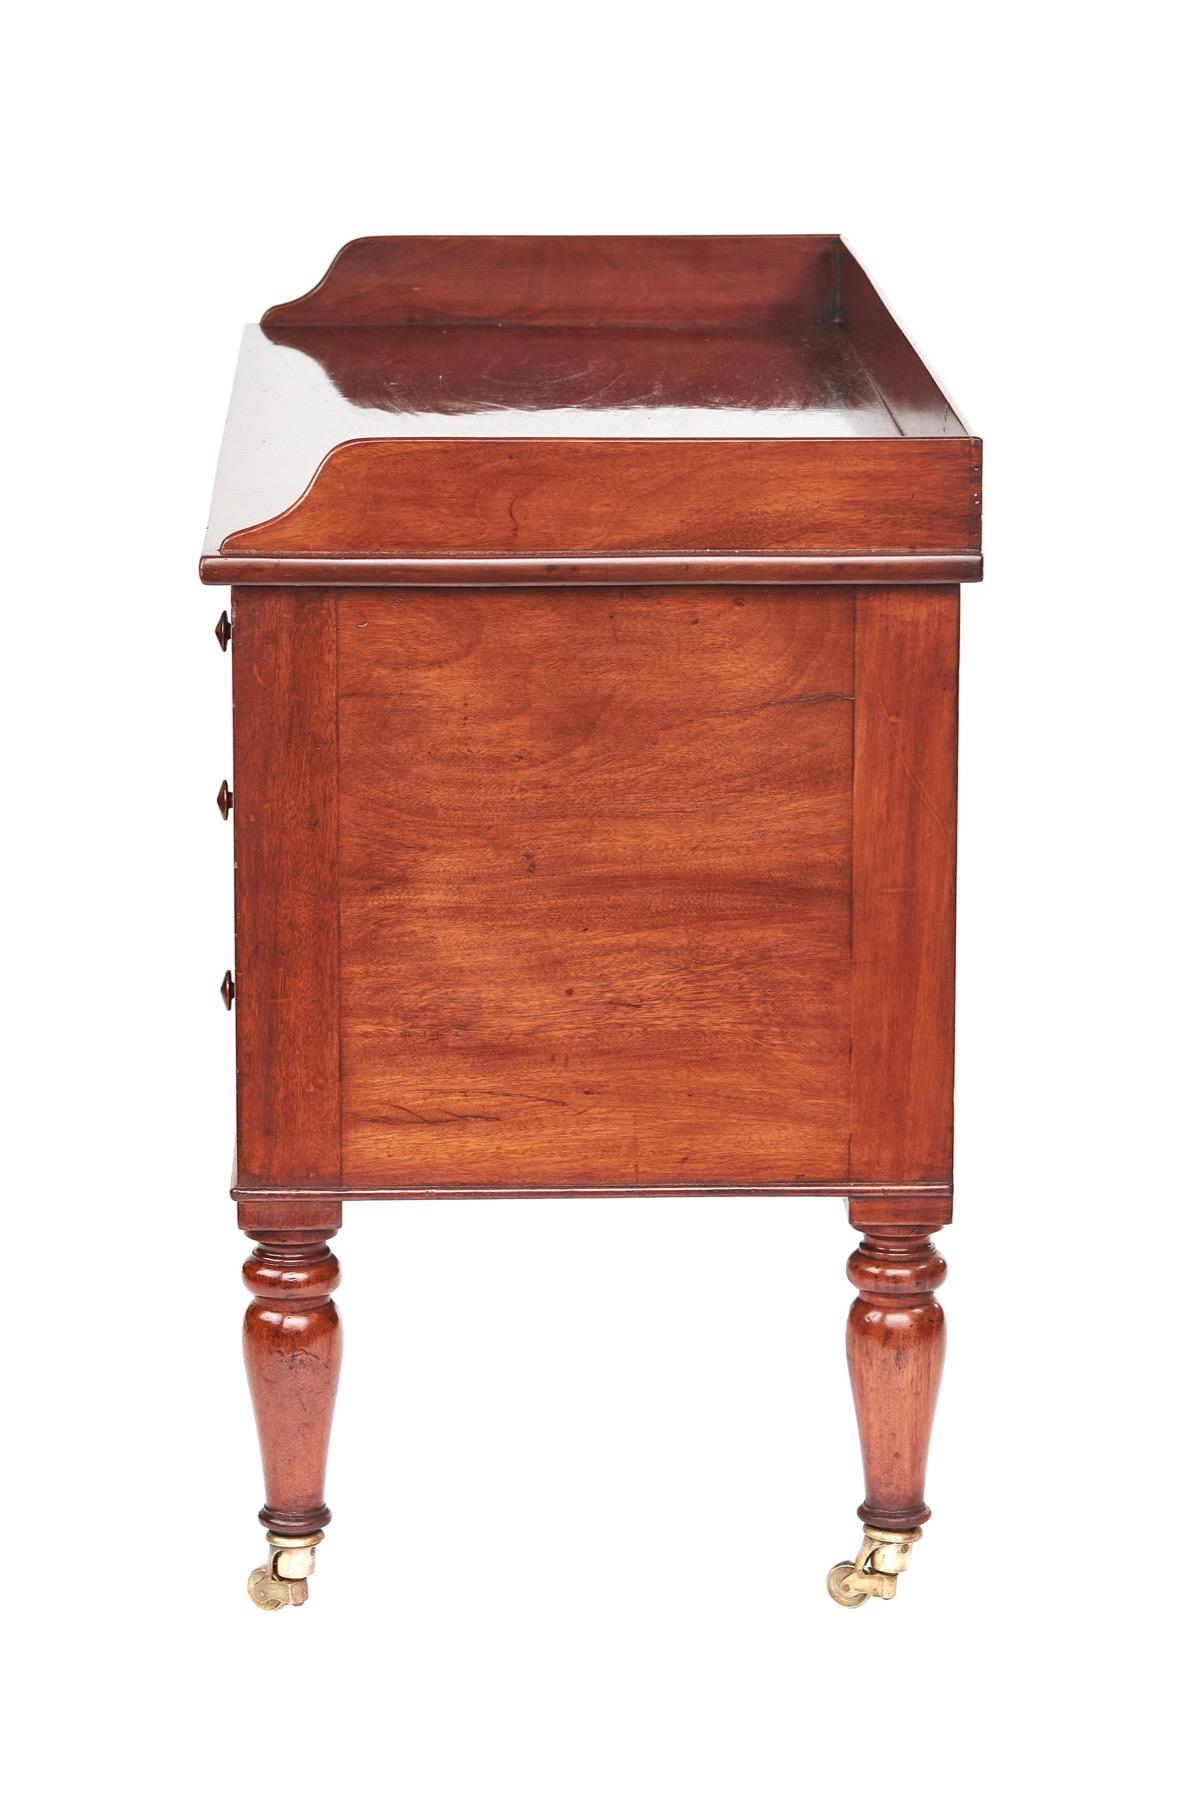 English Mahogany Kneehole Dressing Table by Wilkinsons